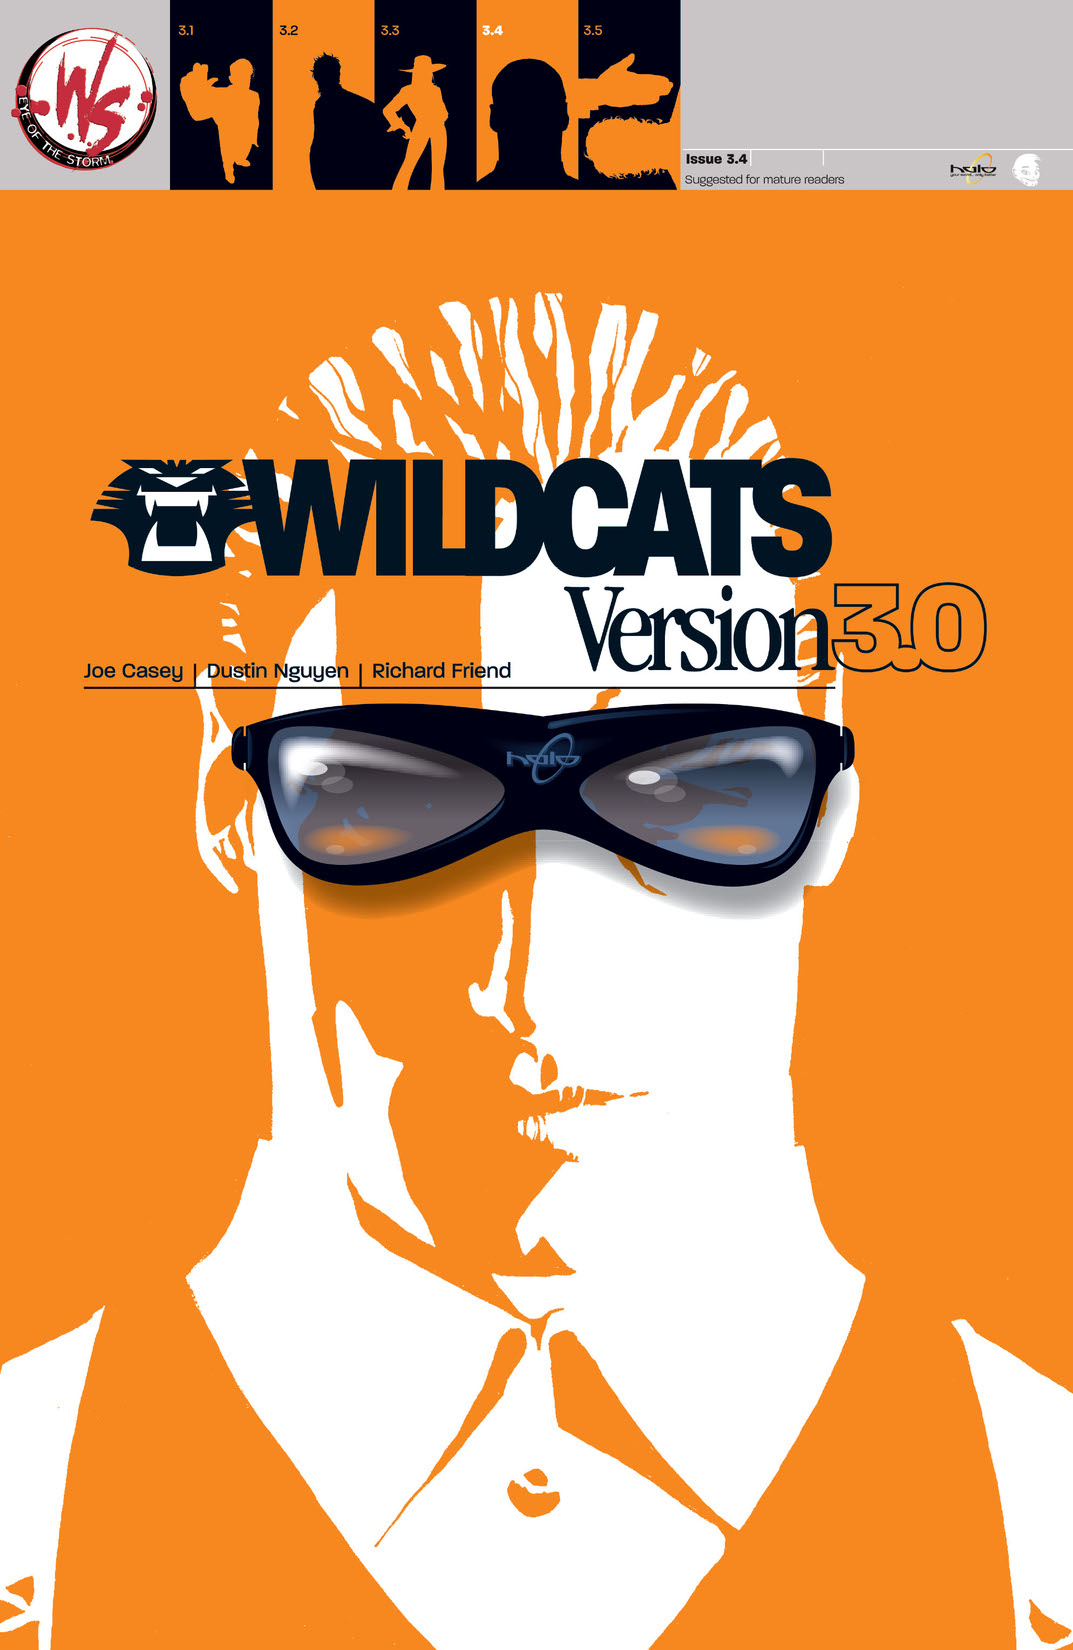 Wildcats Version 3.0 #4 preview images